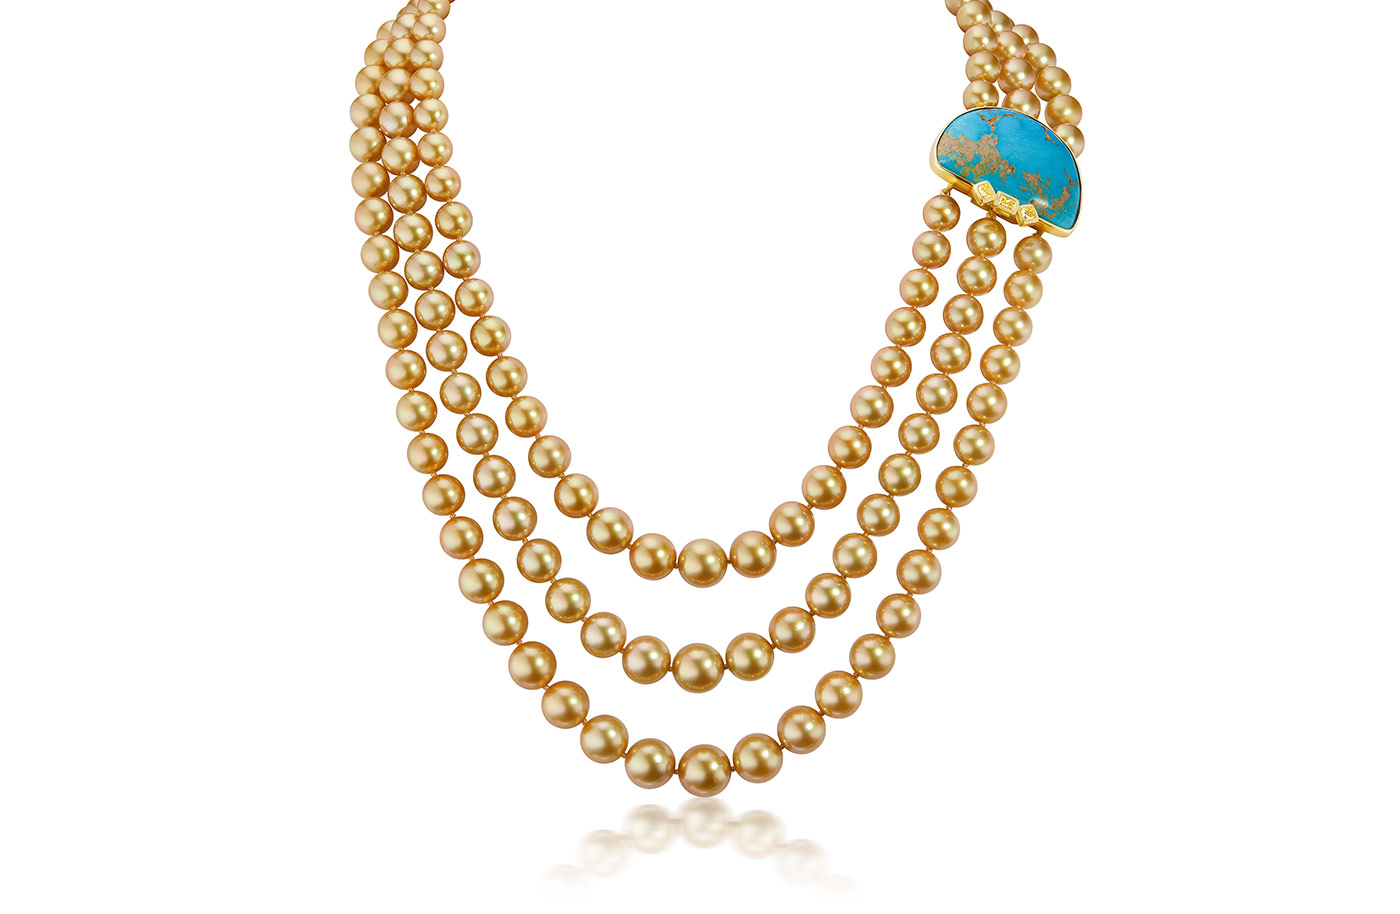 Assael three-strand golden South Sea pearl necklace with a turquoise and gold clasp